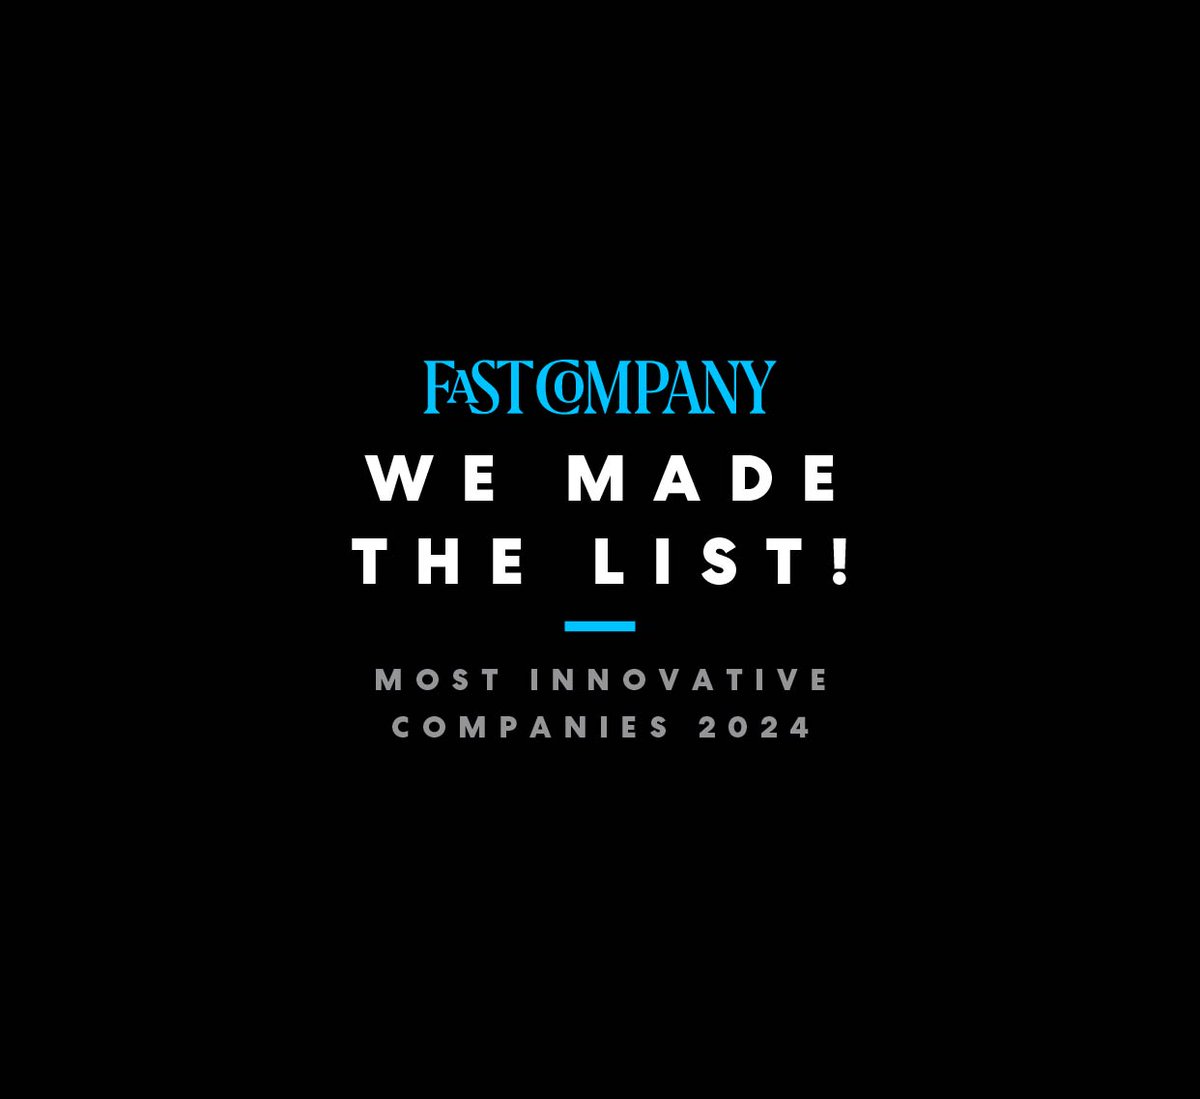 PHS has been named one of @FastCompany's Most Innovative Companies of 2024! #FCMostInnovative 🌱 Read about how we look forward to innovating further with the PHS community and our partners to expand and deliver on our mission here: bit.ly/4cAi5hR